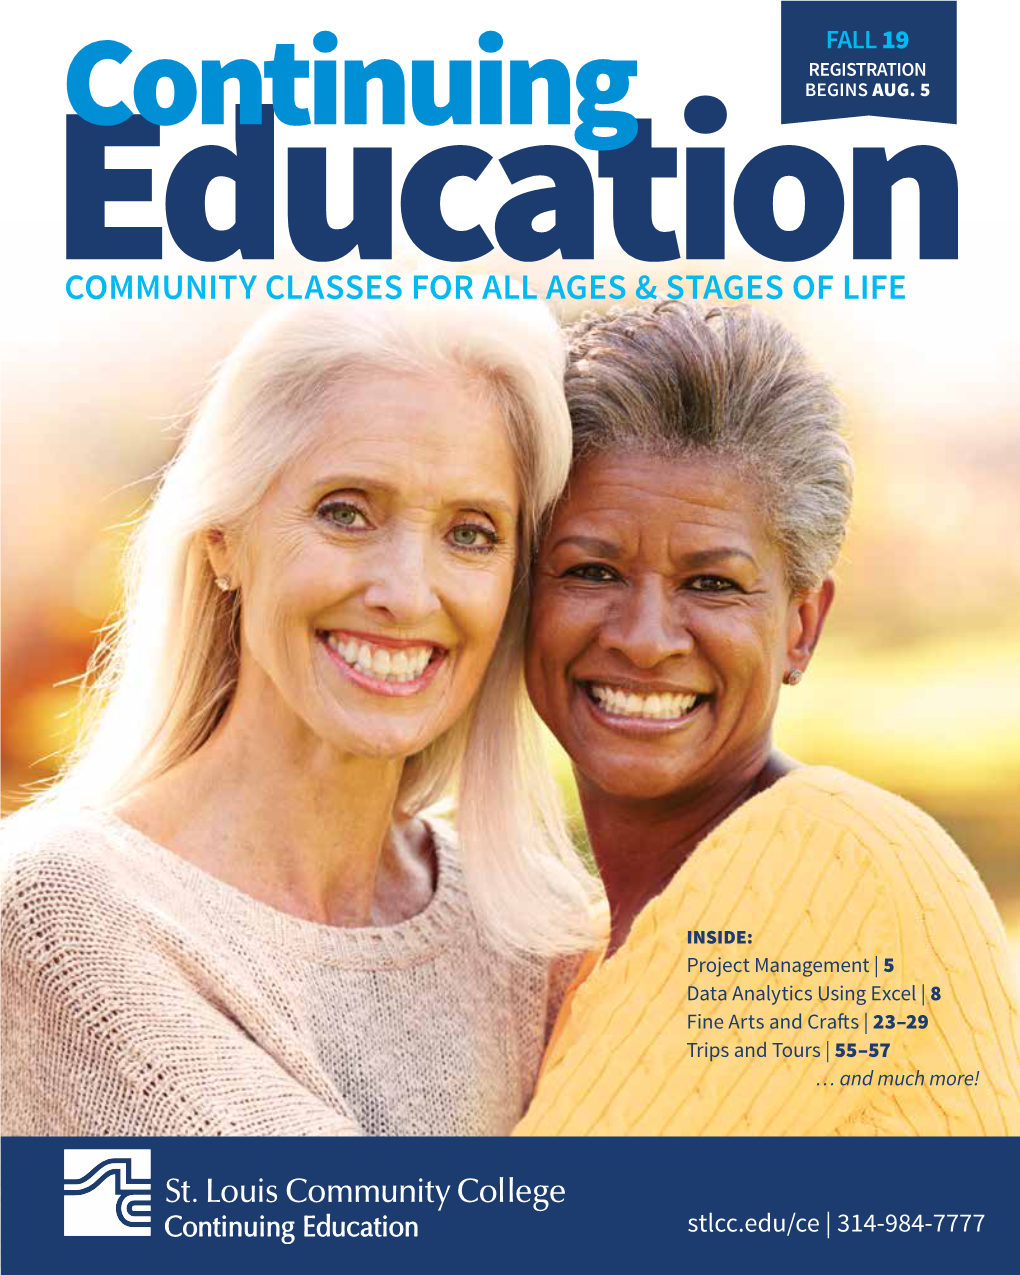 Educationcommunity CLASSES for ALL AGES & STAGES of LIFE